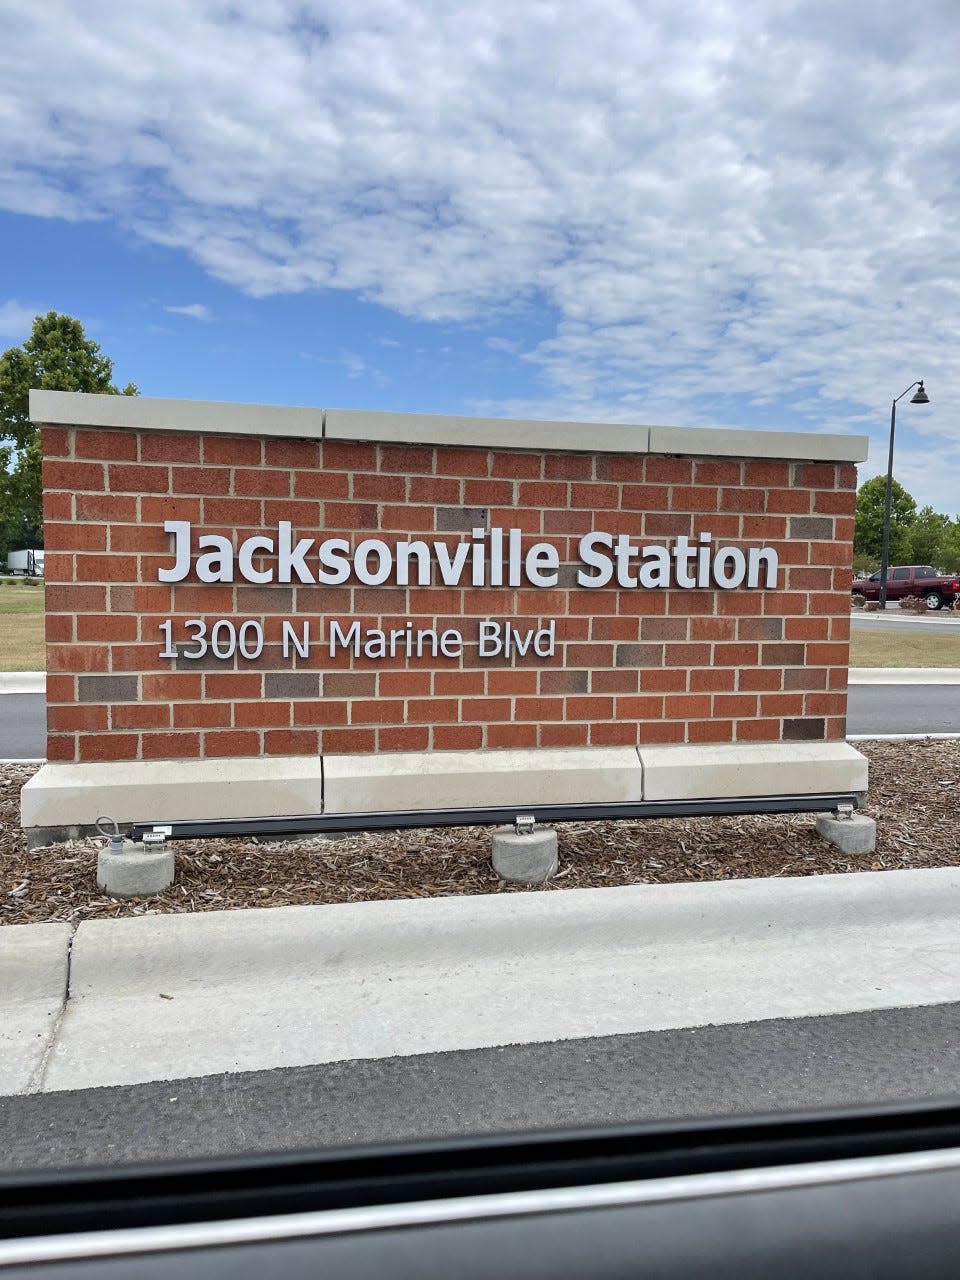 Jacksonville Station is now open and serves as a center for all different modes of transportation.